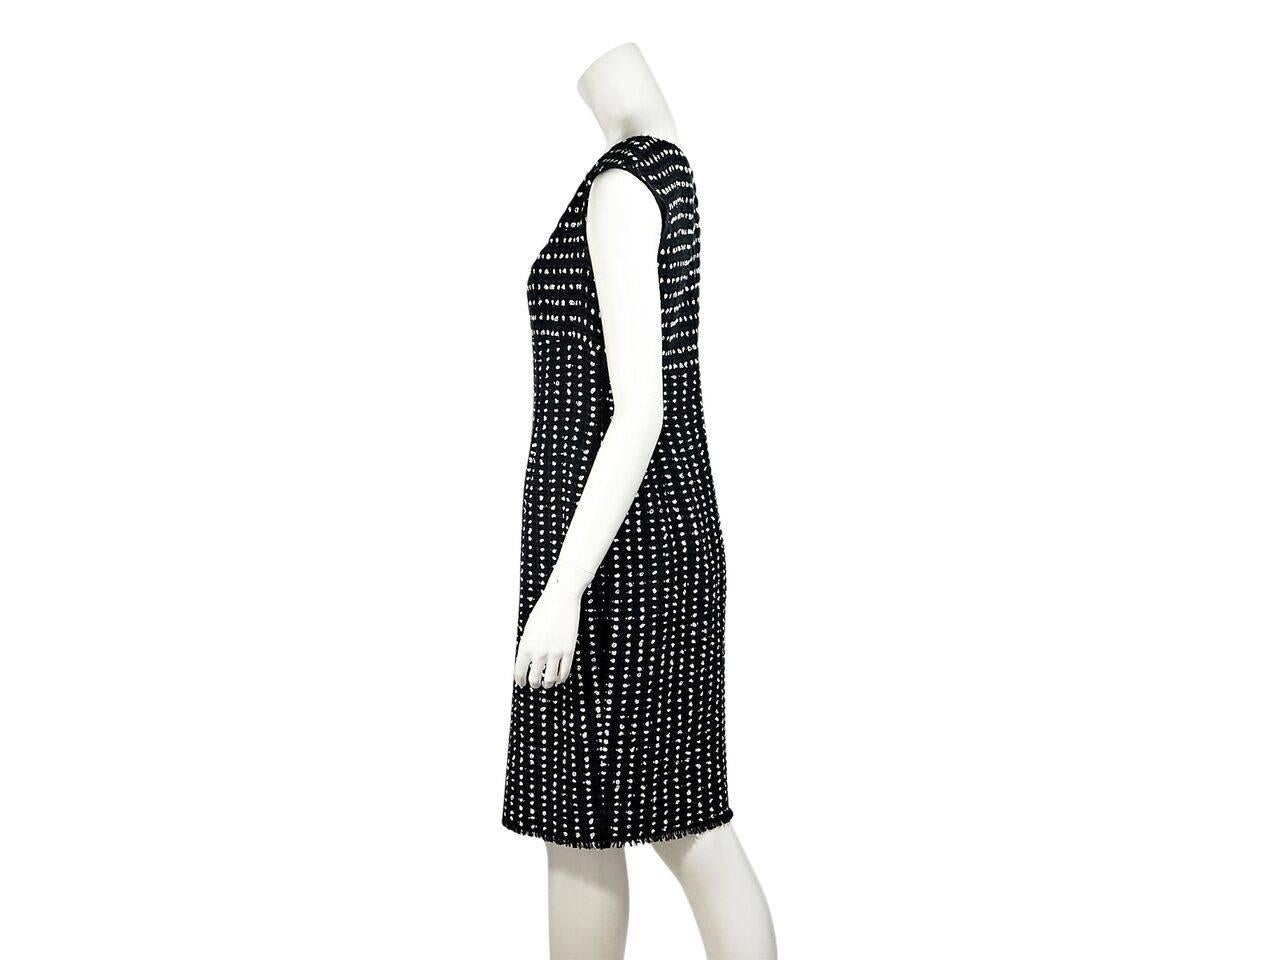 Product details:  Navy blue woven sheath dress by Escada.  Accented with white polka dots.  V-neck.  Cap sleeves.  Concealed back zip closure.  Fringed hem.  Label size IT 38.
Condition: Pre-owned. Very good.
Est. Retail $ 348.00